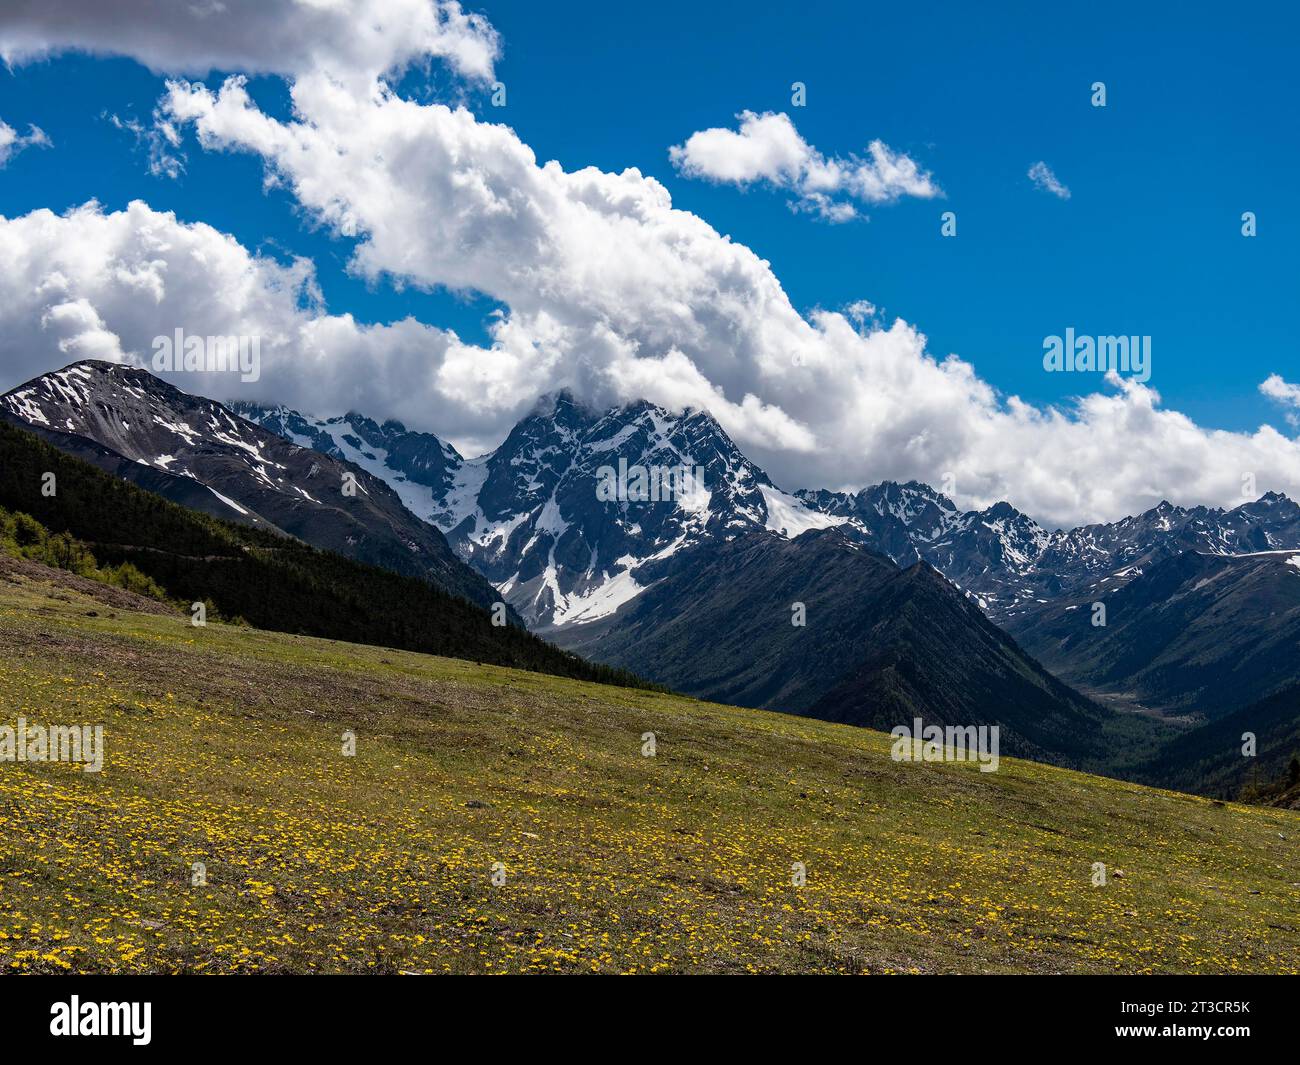 Mountain ranges with snow and meadows with yellow flowers in the highlands of eastern Tibet, China Stock Photo